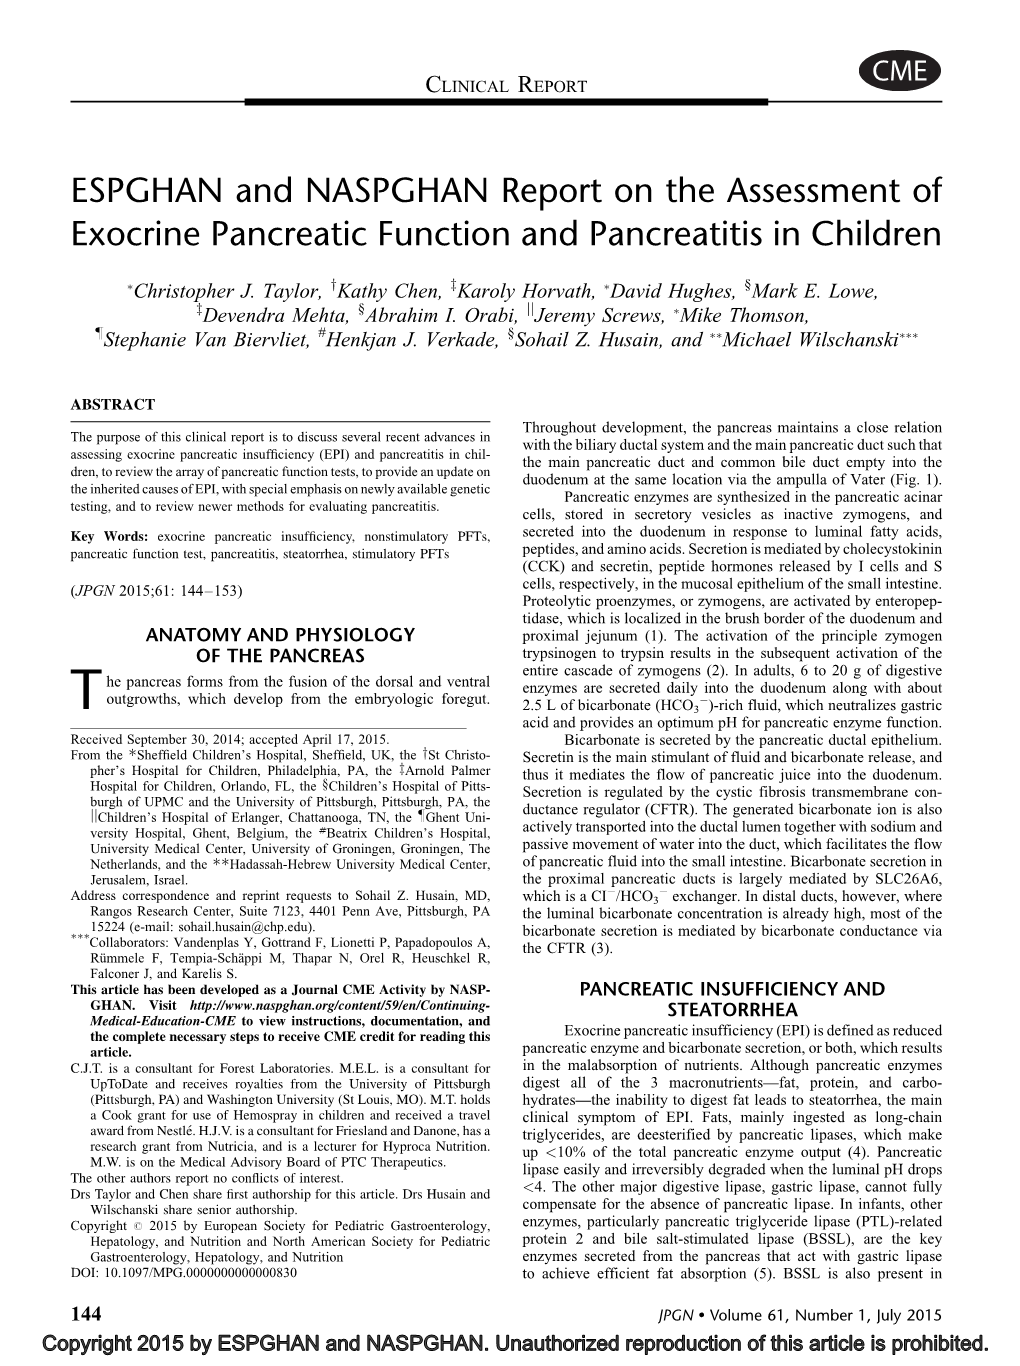 ESPGHAN and NASPGHAN Report on the Assessment of Exocrine Pancreatic Function and Pancreatitis in Children